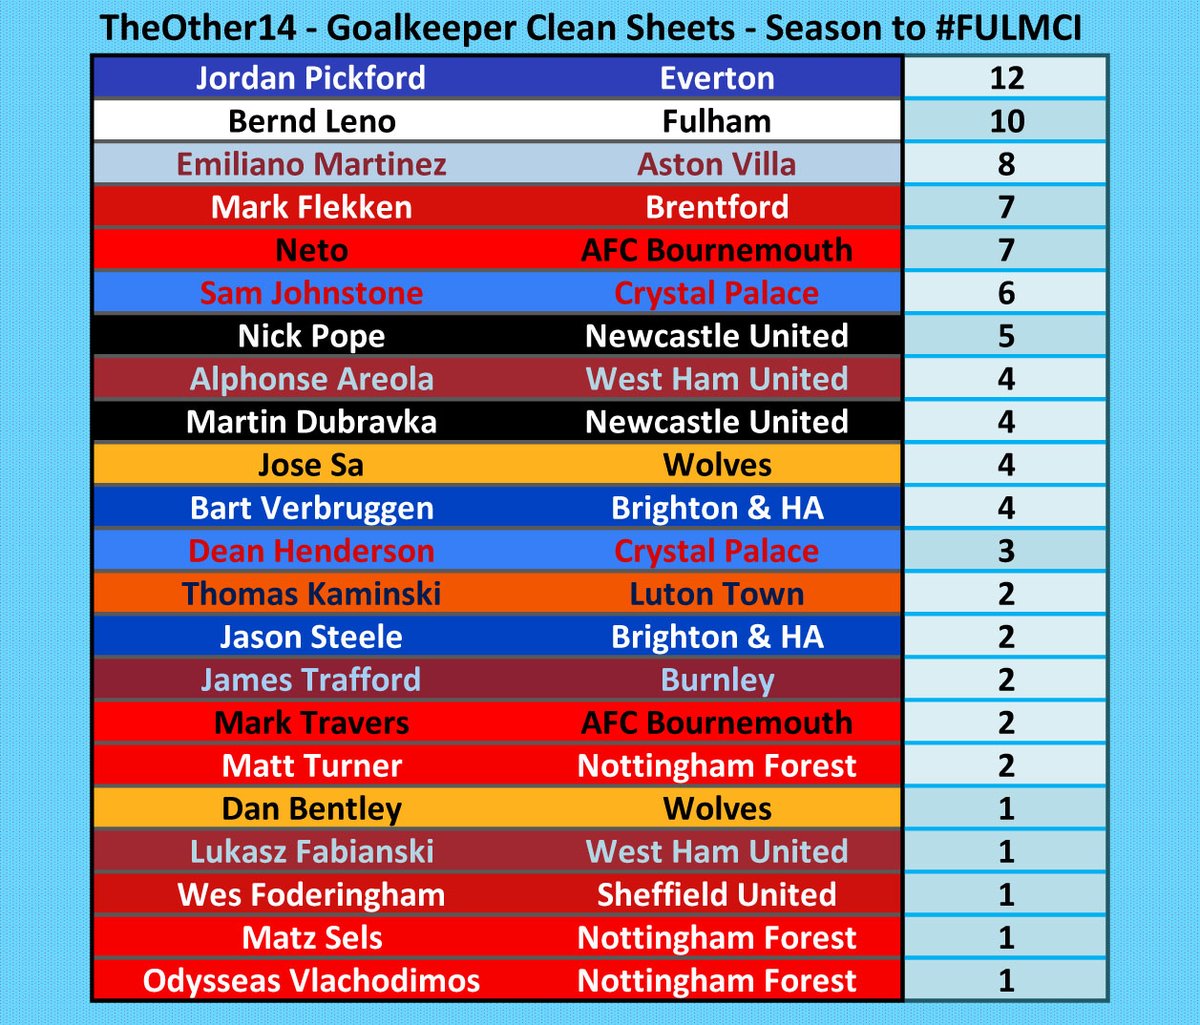 As Bernd Leno has conceded a goal today, @JPickford1 can no longer be caught in the race for TheOther14 Golden Glove. @Other14The #EFC #FFC #AVFC #BrentfordFC #AFCB #CPFC #NUFC #WHUFC #Wolves #BHAFC #LTFC #twitterclarets #NFFC #twitterblades